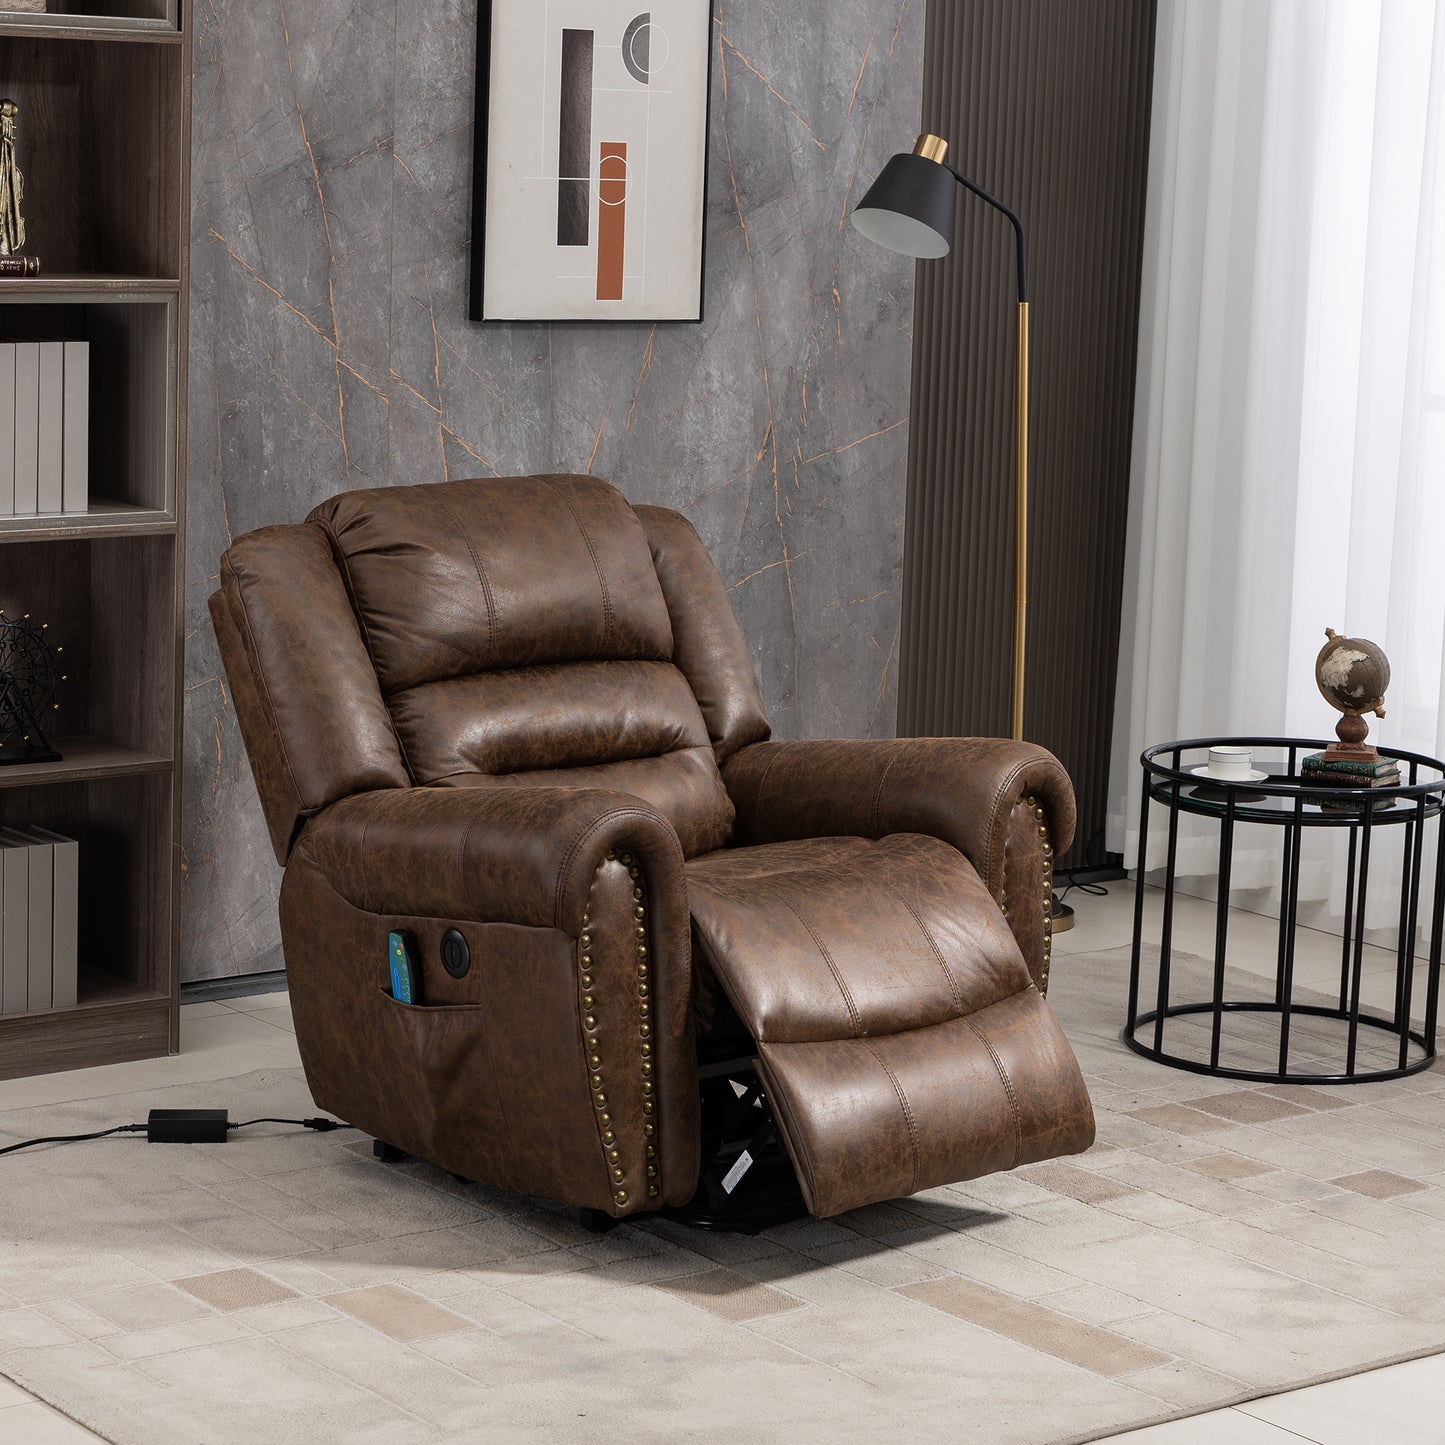 Power Lift Recliner Chair with Heat Therapy and Massage Function, Electric Lift Chair Recliner Fabric Single Sofa, Heavy Duty Living Room Furniture Home Theater Seating, 2 Large Side Pockets, Brown